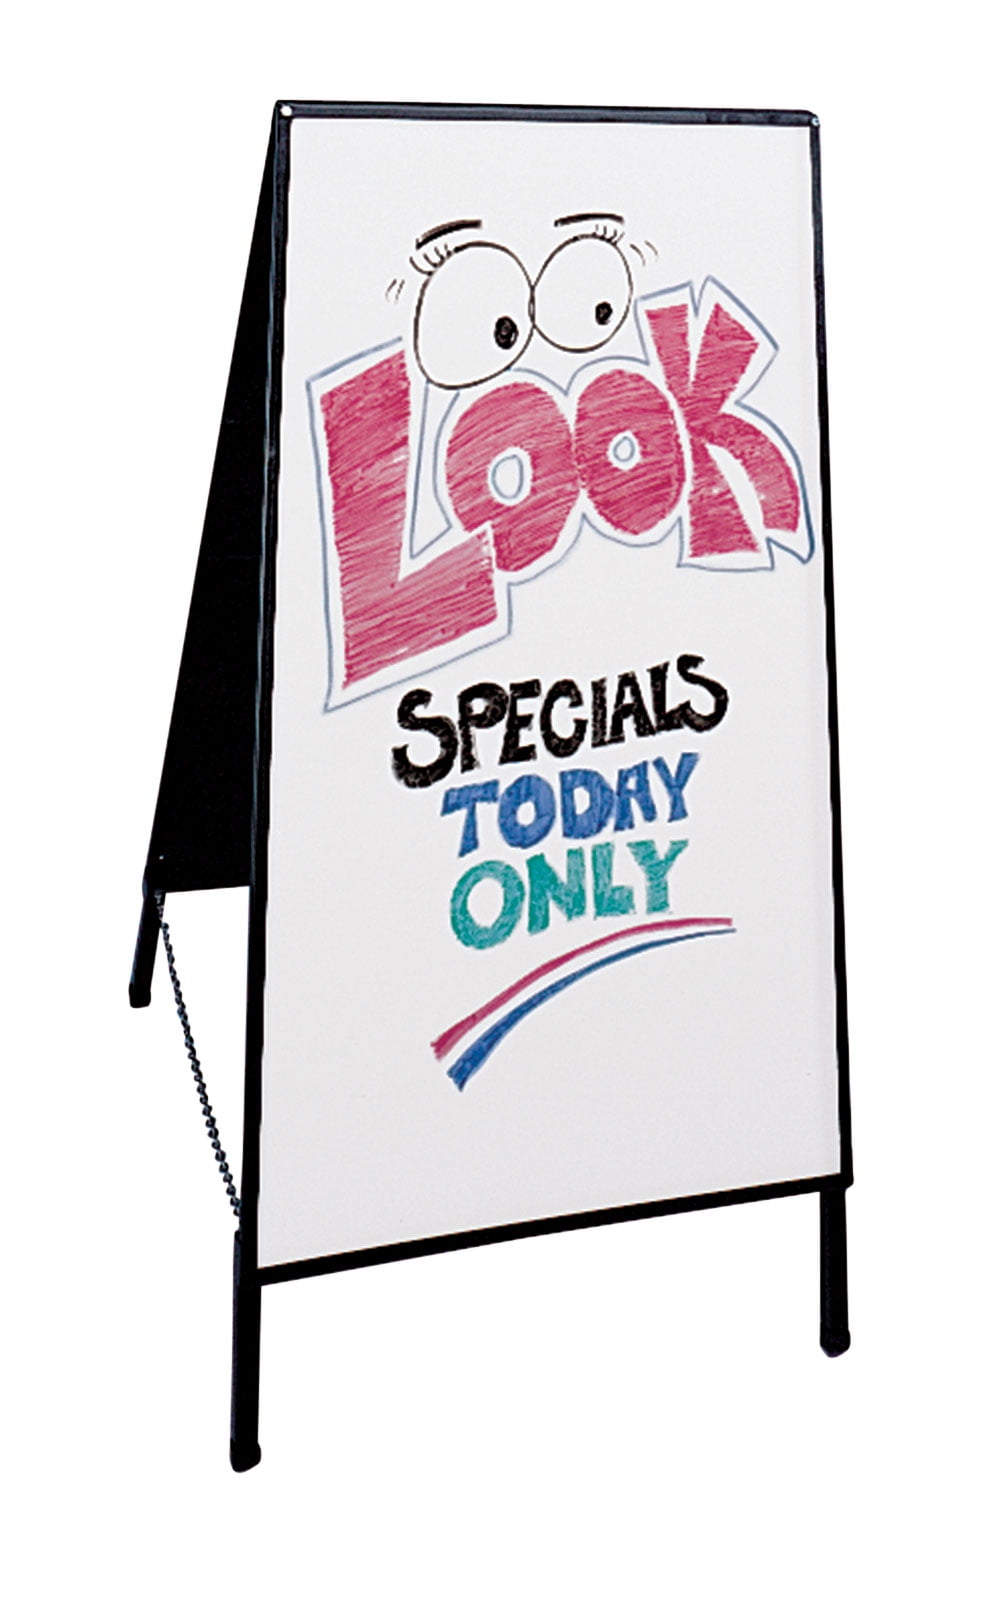 Acrylic Dry Erase Board with Light, 11.8”x7.9” Glow Memo Tablet